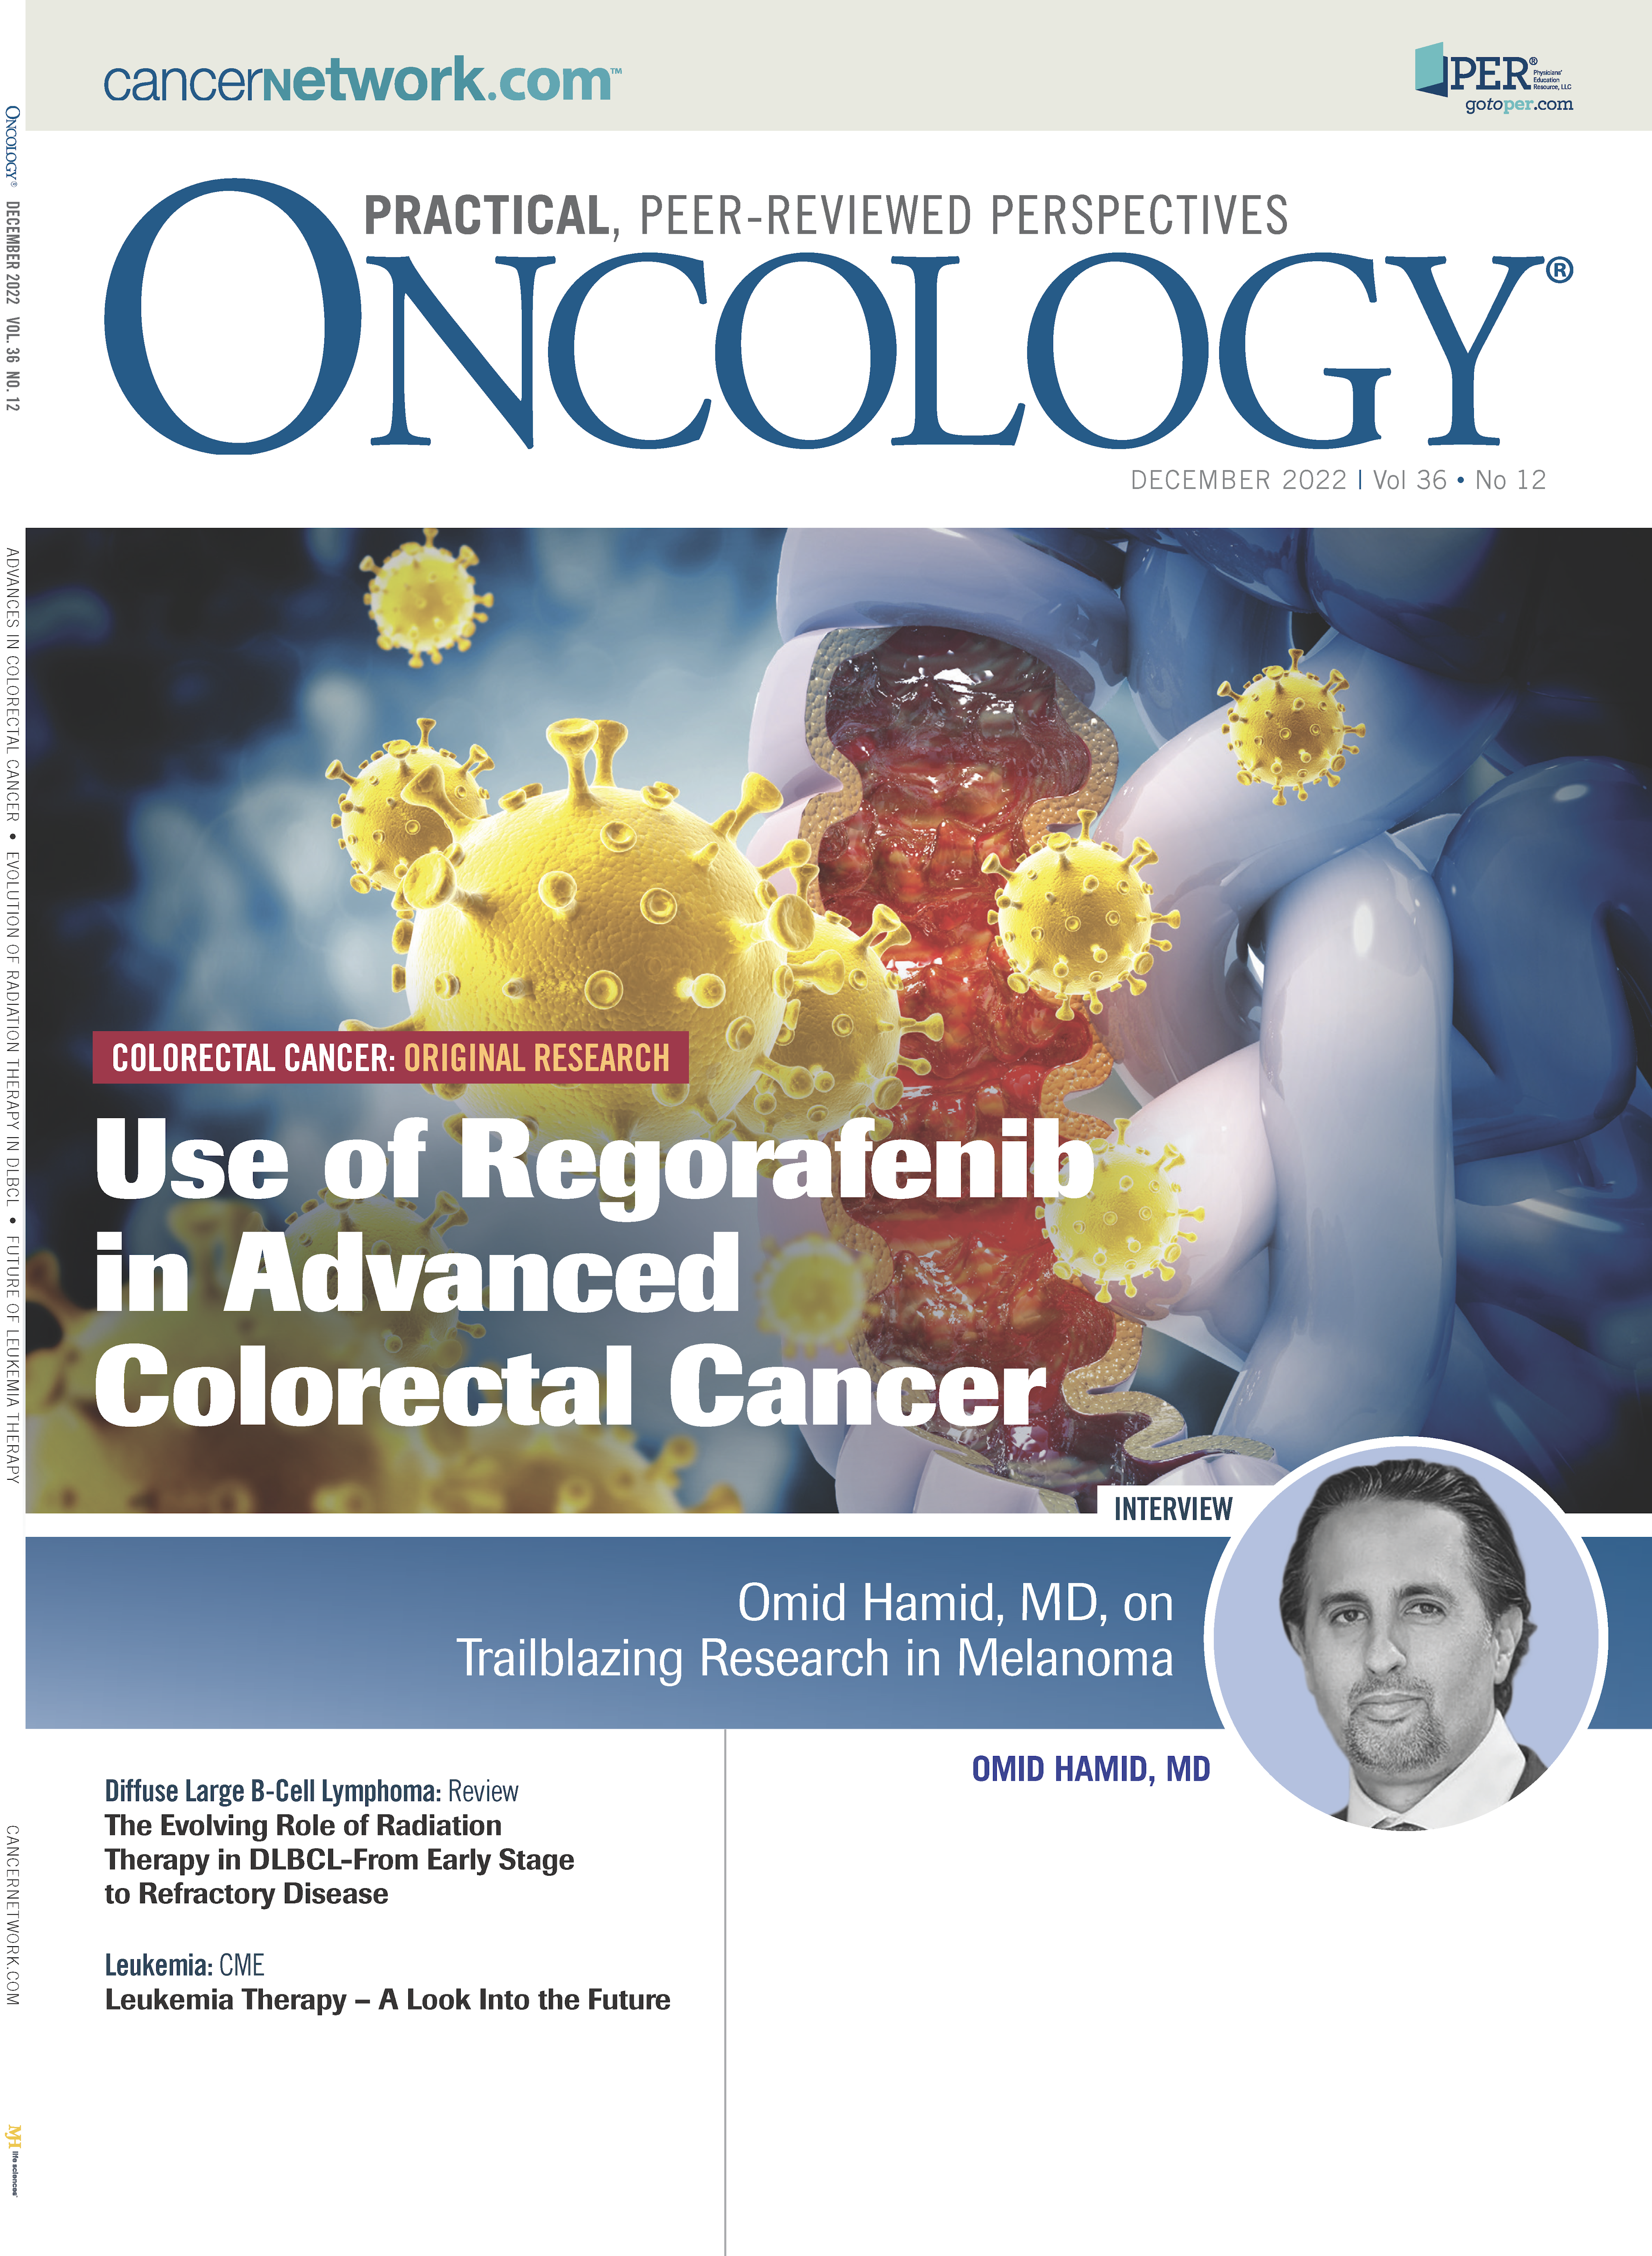 ONCOLOGY Vol 36, Issue 12